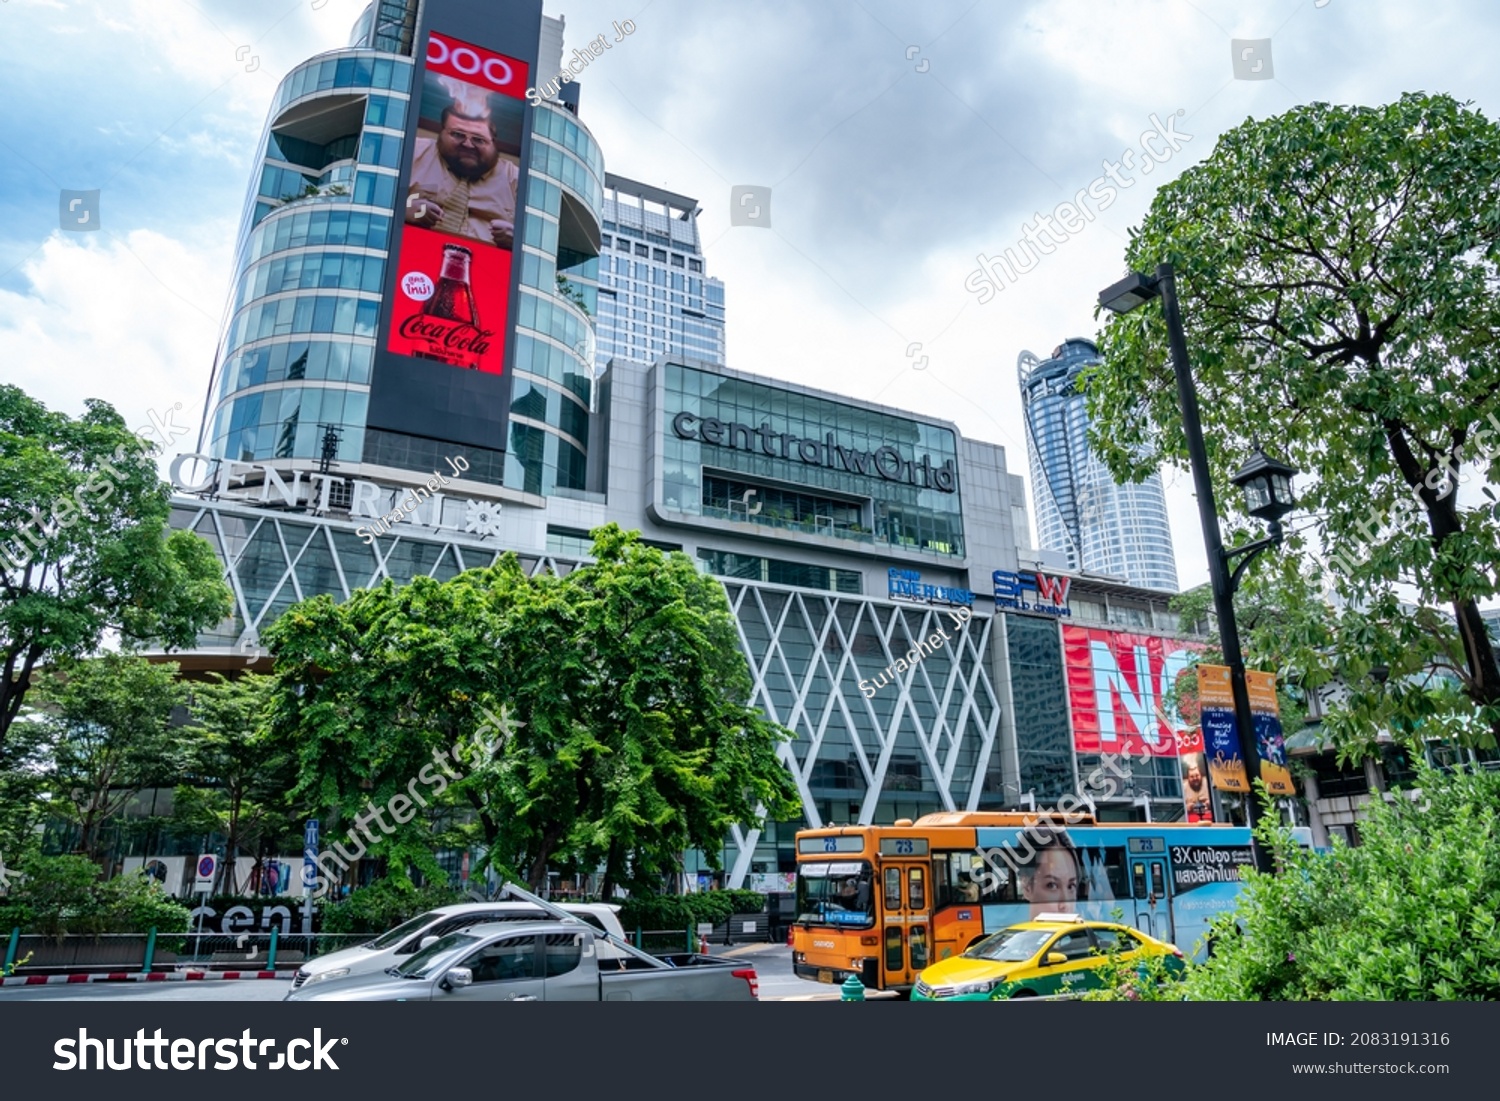 Stock Photo Bangkok Thailand Aug Centralworld Building Is A Shopping Plaza It Is The Eleventh 2083191316 